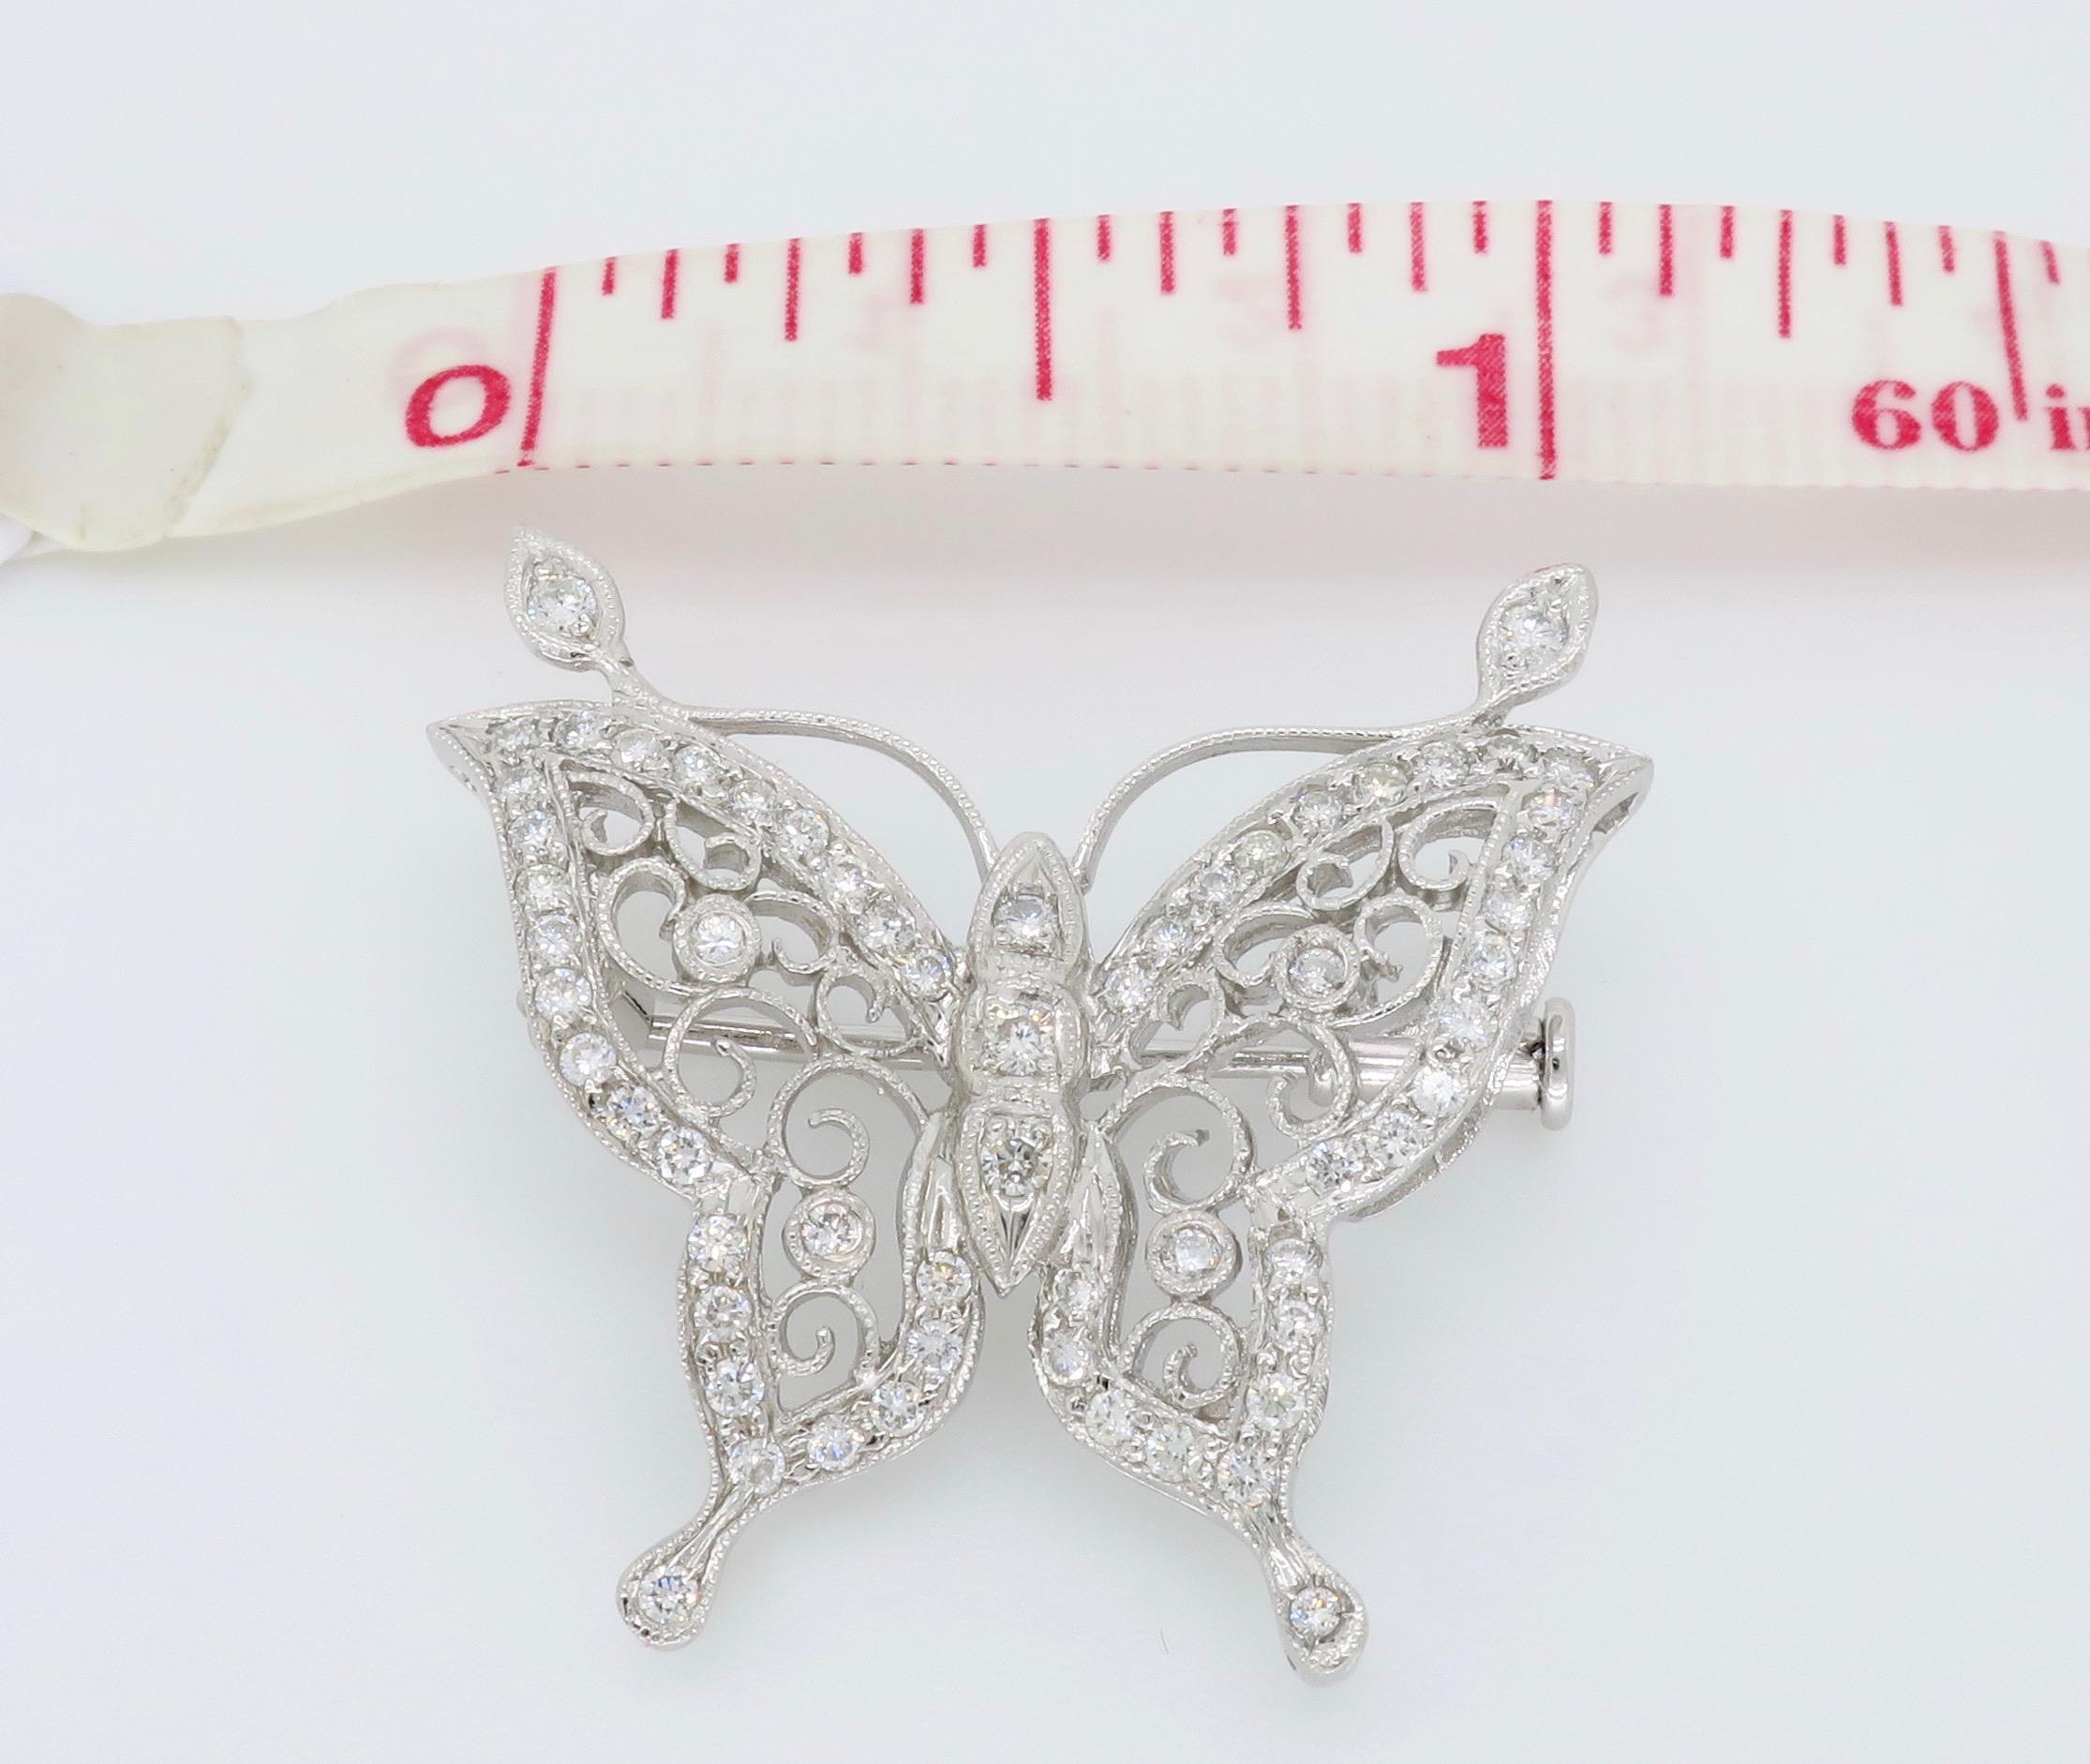 18 Karat White Gold Diamond Butterfly Brooch In Excellent Condition For Sale In Webster, NY